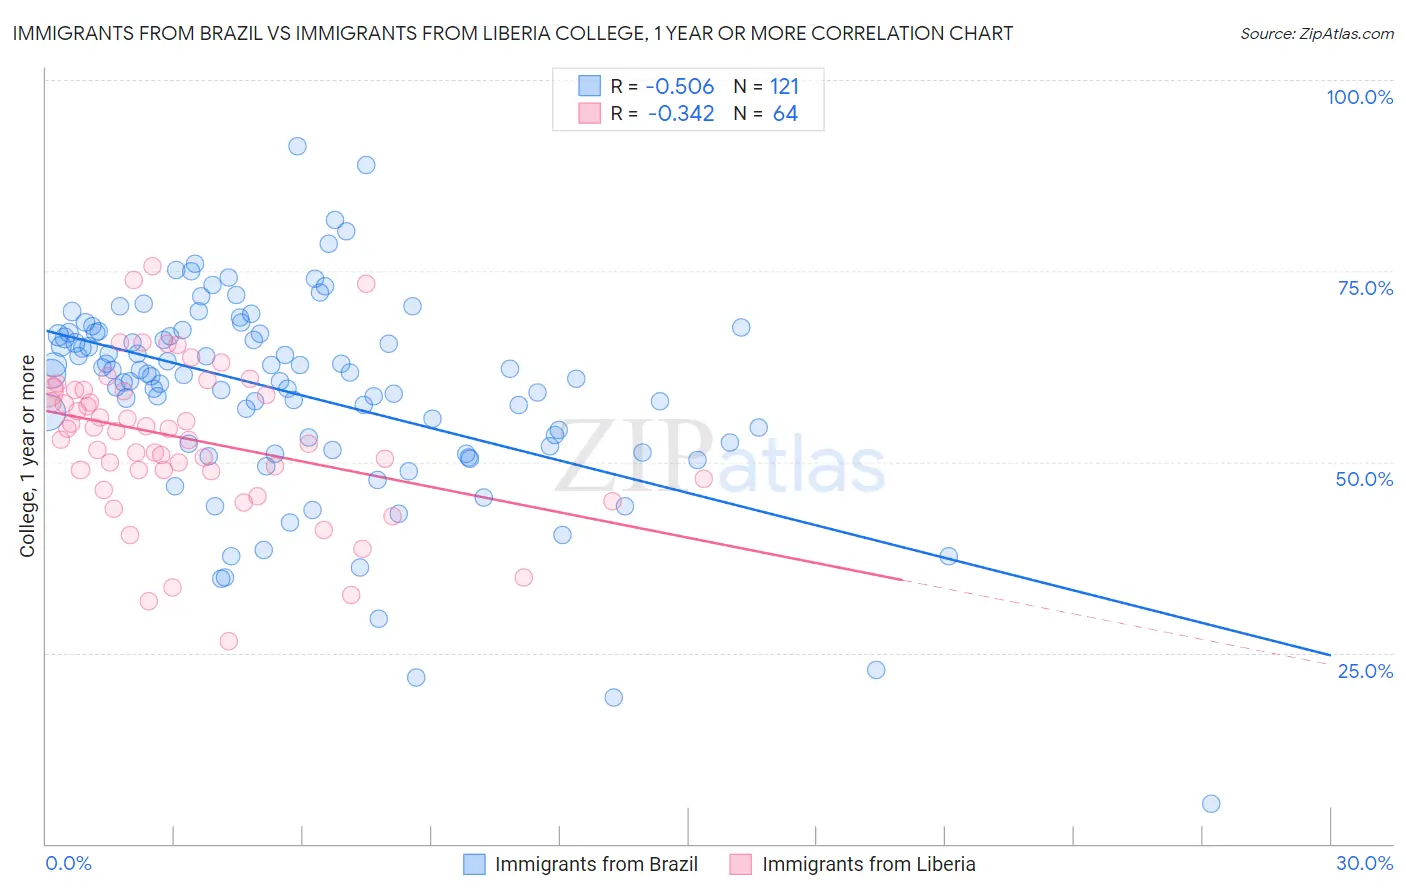 Immigrants from Brazil vs Immigrants from Liberia College, 1 year or more